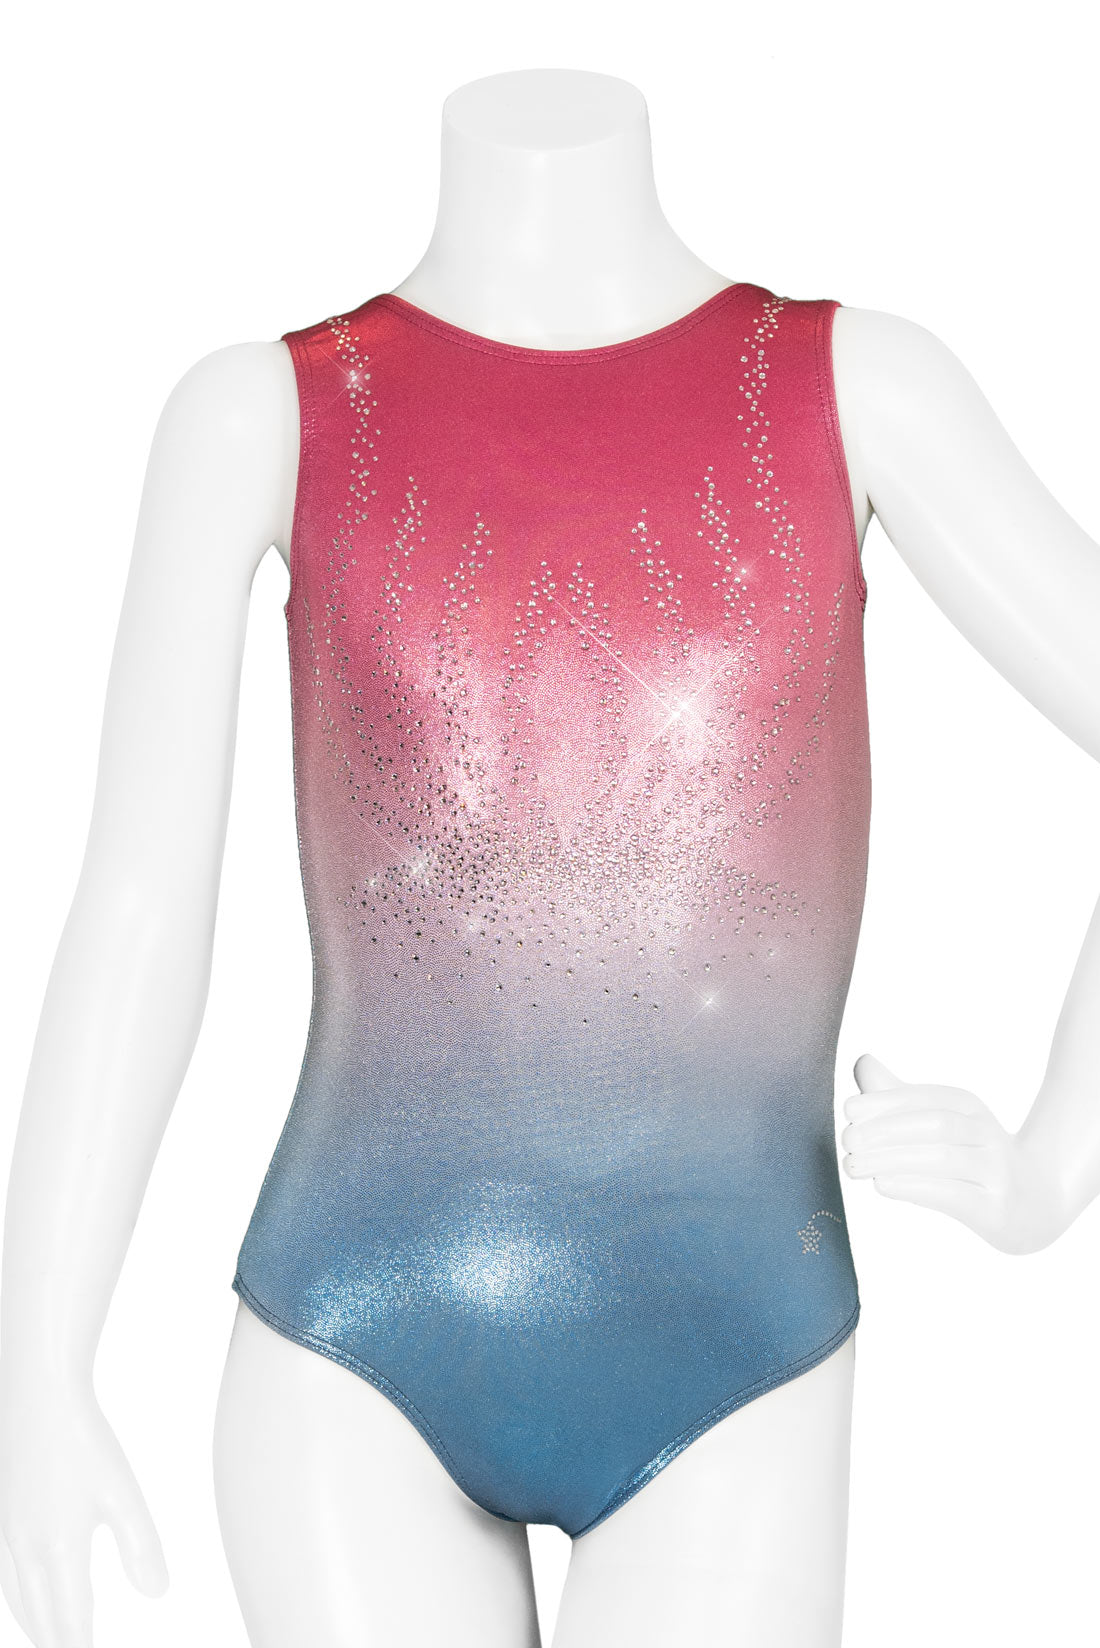 Red, white, and blue gymnastics leotard with crystals by Destira, 2024